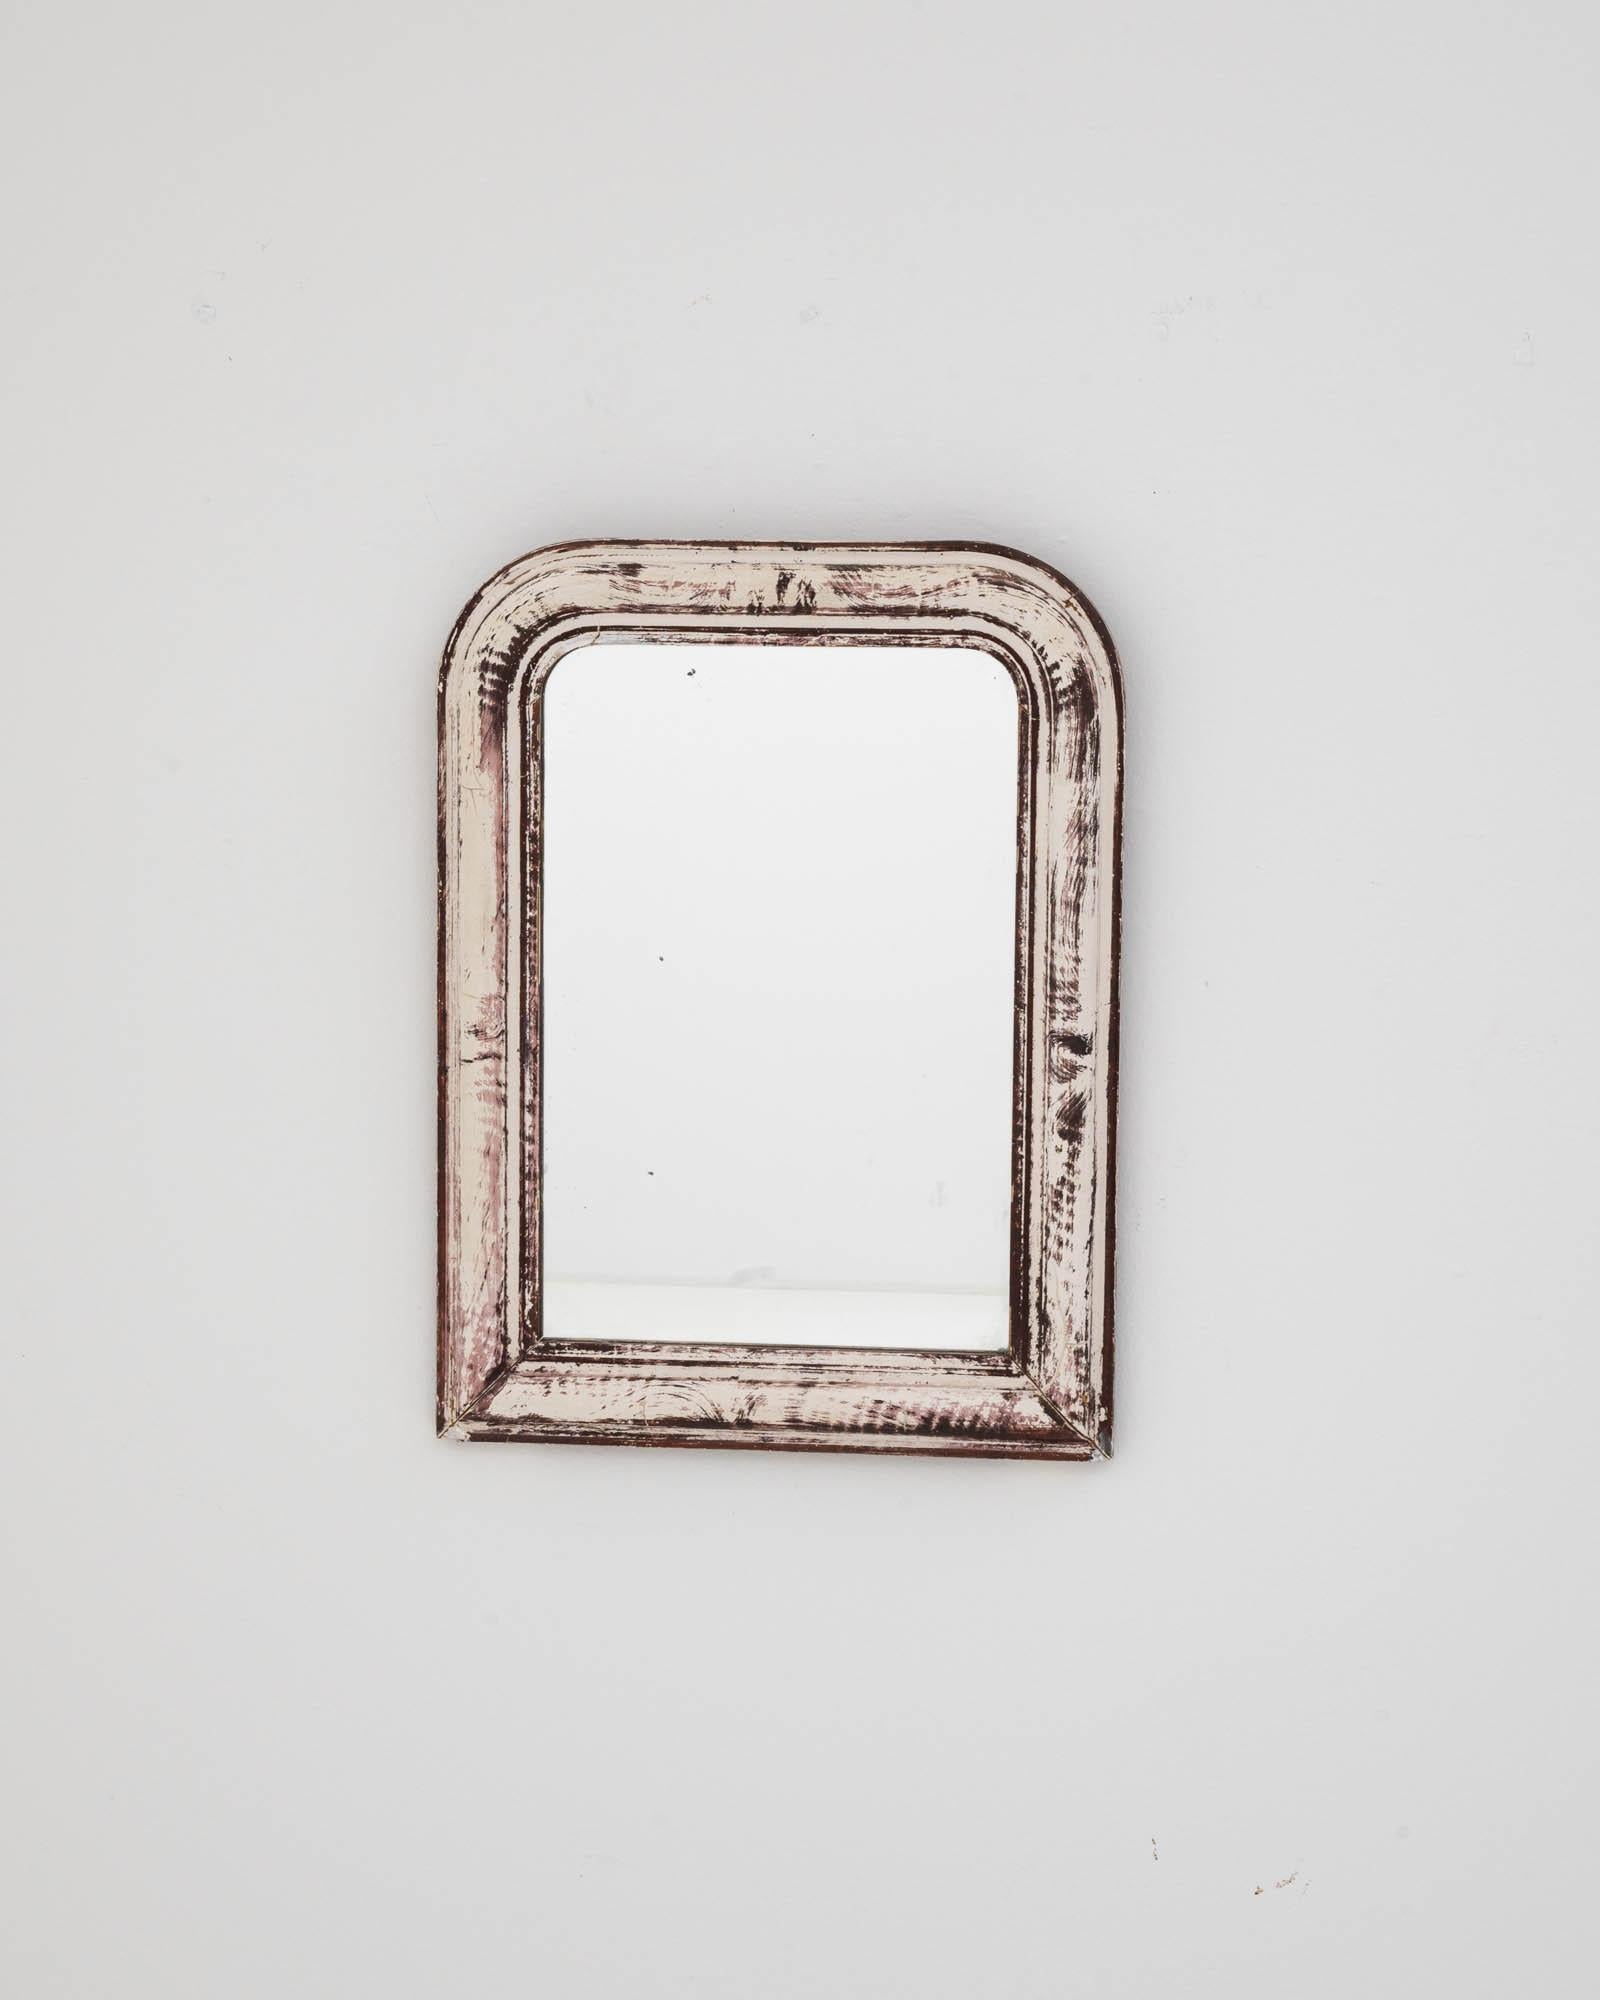 The 1900s French wood white patinated mirror presents an understated elegance that resonates with the shabby chic aesthetic. The distressed white paint reveals glimpses of the wood beneath, highlighting the mirror's journey through time and adding